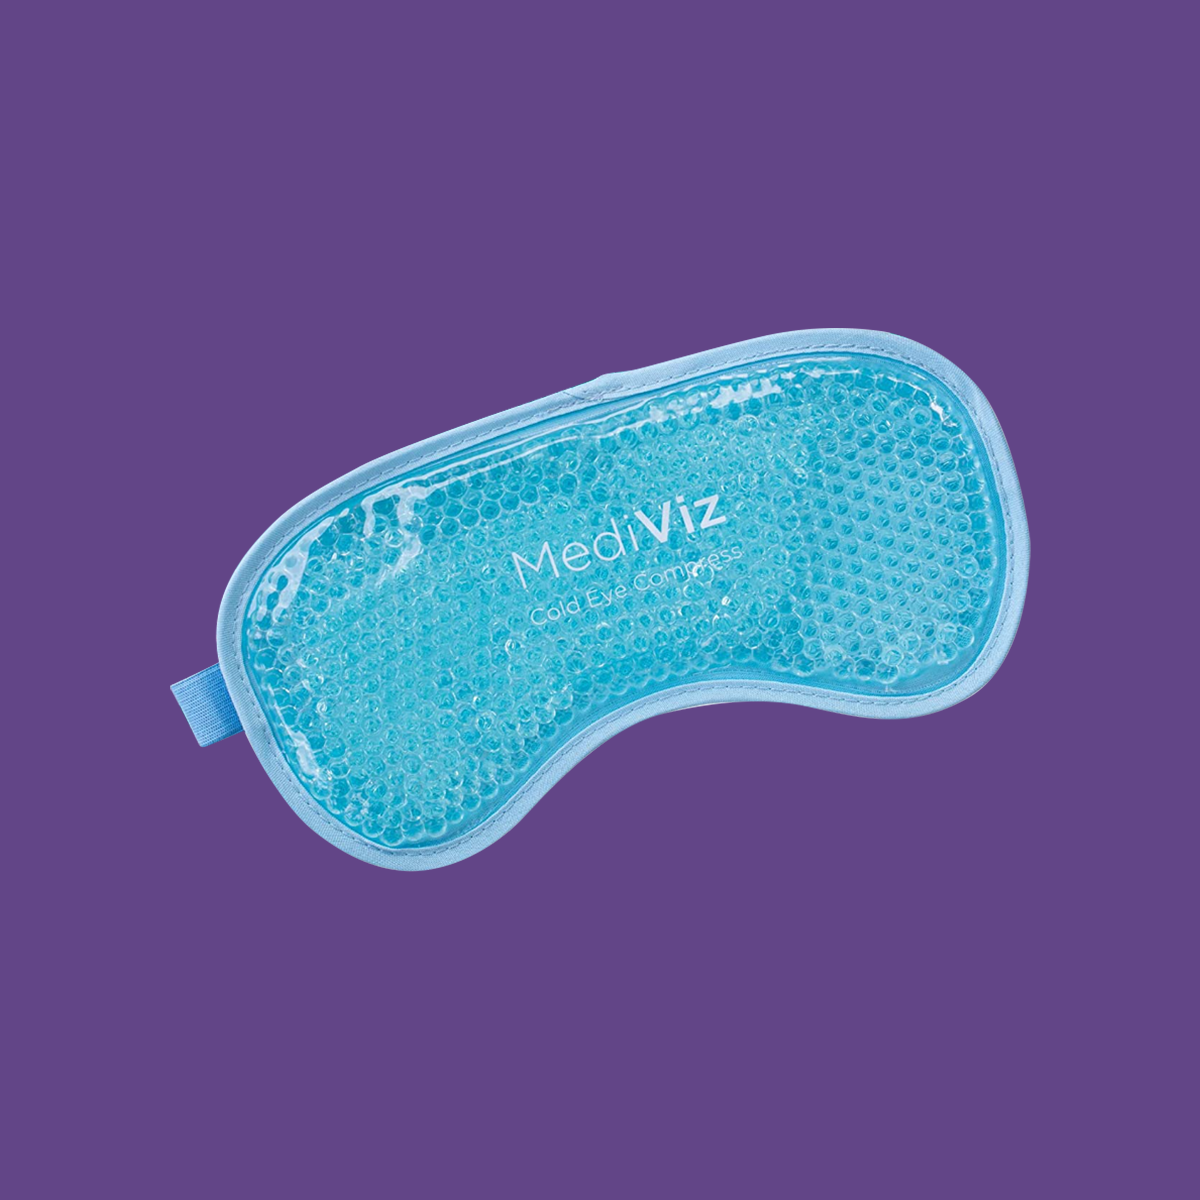 MediViz Cooling Eye Mask for Puffy Eyes, Allergies, Sinuses, and Itchy Eyes